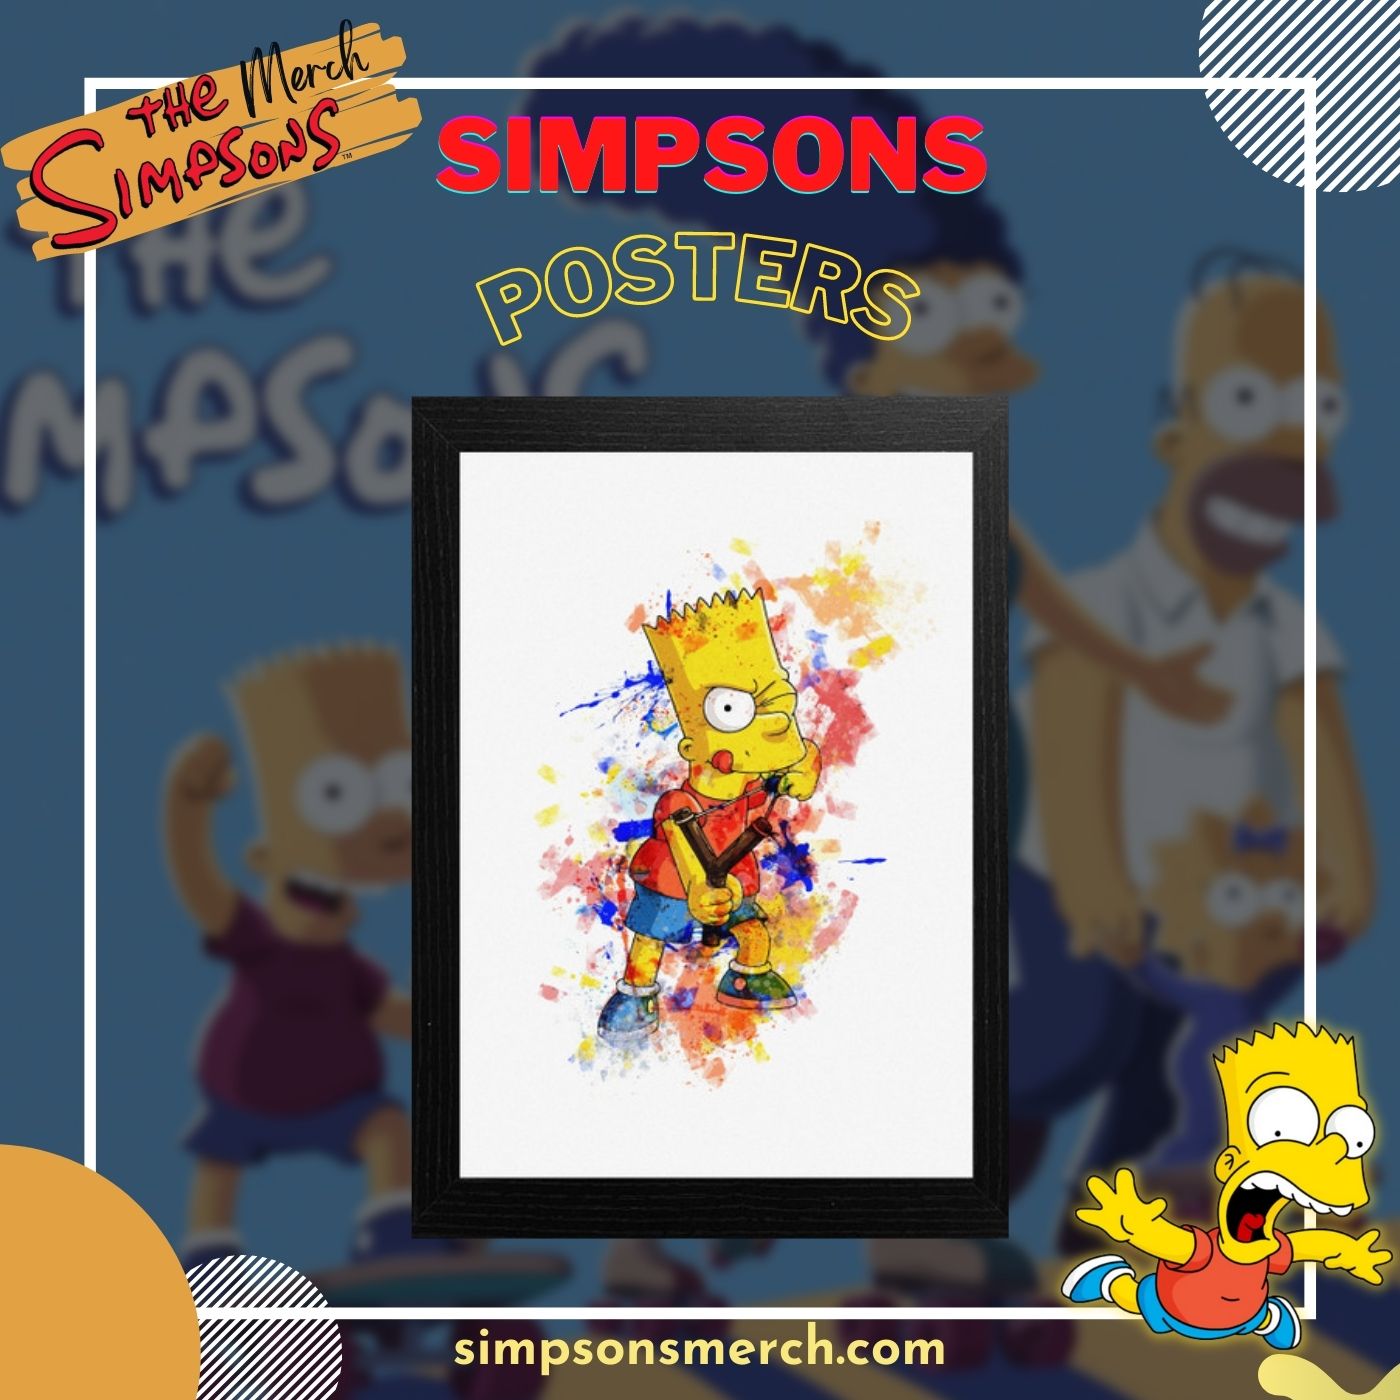 SimpSons Posters 1 - The Simpsons Shop